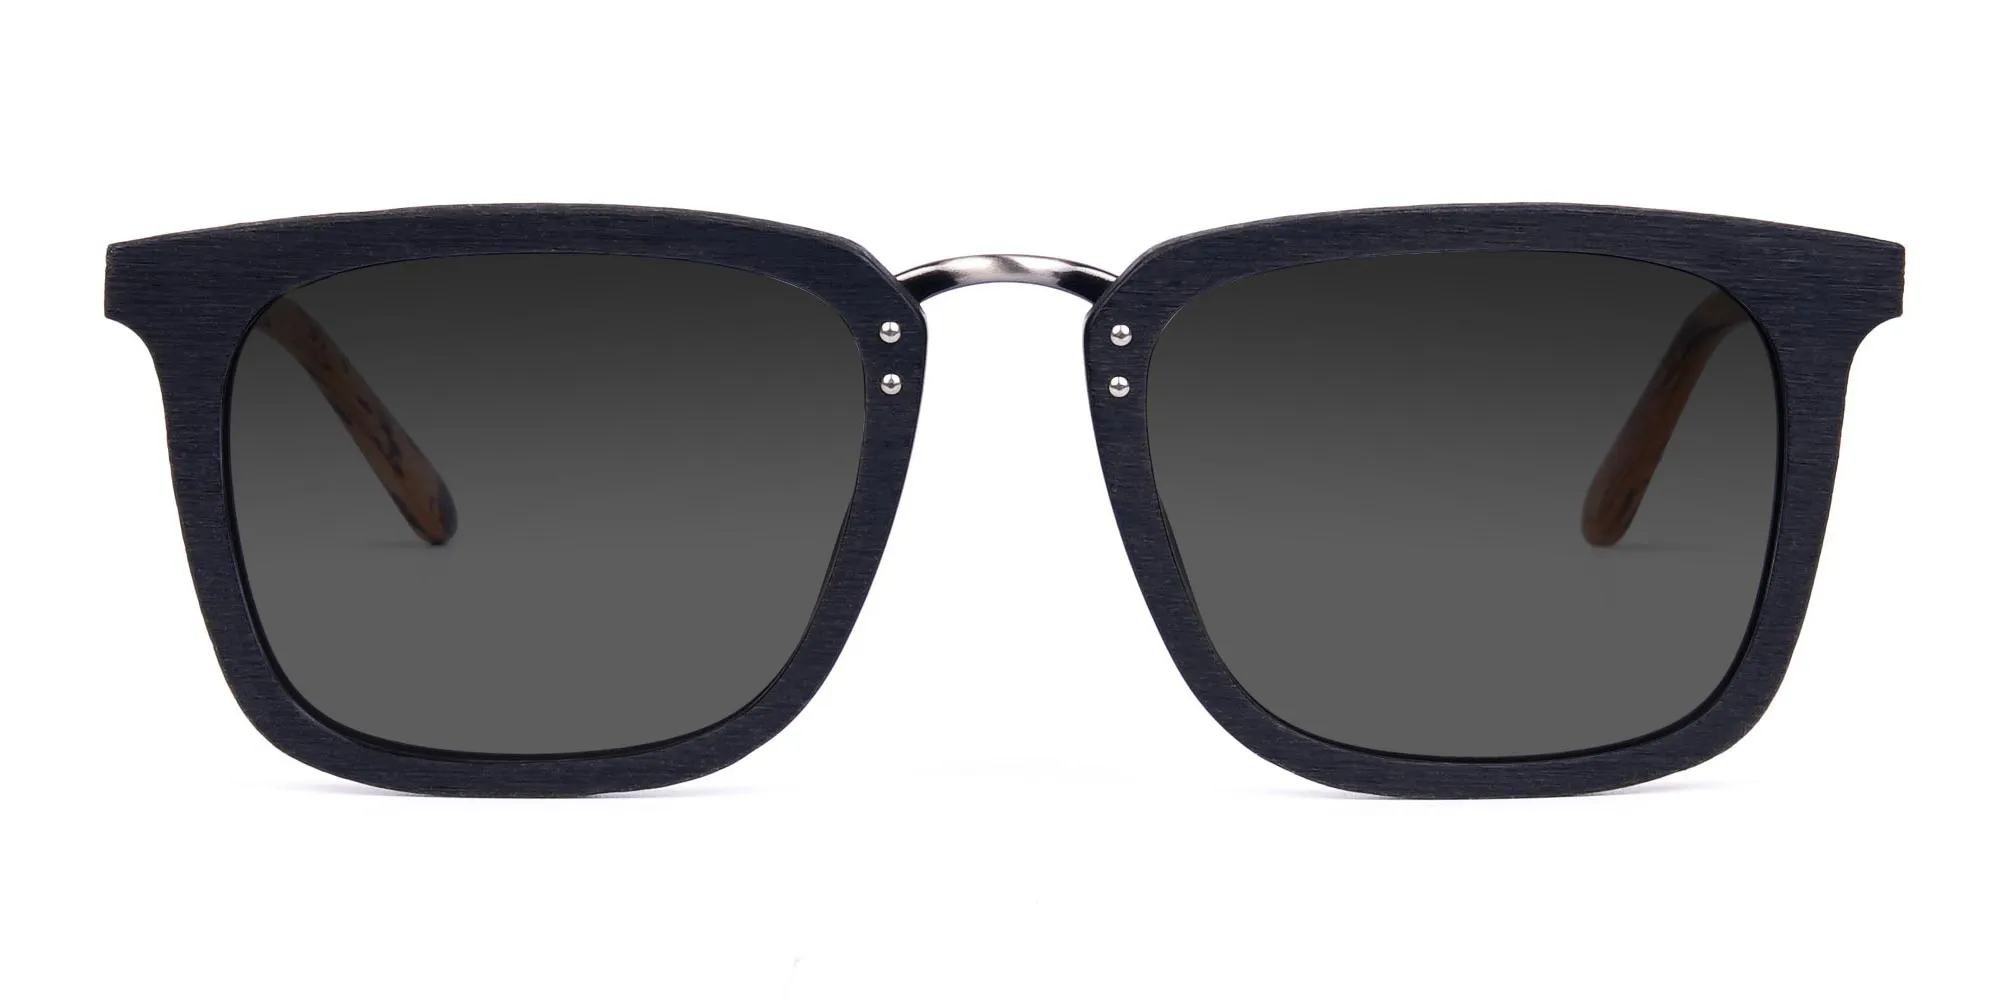 Wood-Black-Square-Sunglasses-with-Grey-Tint-1